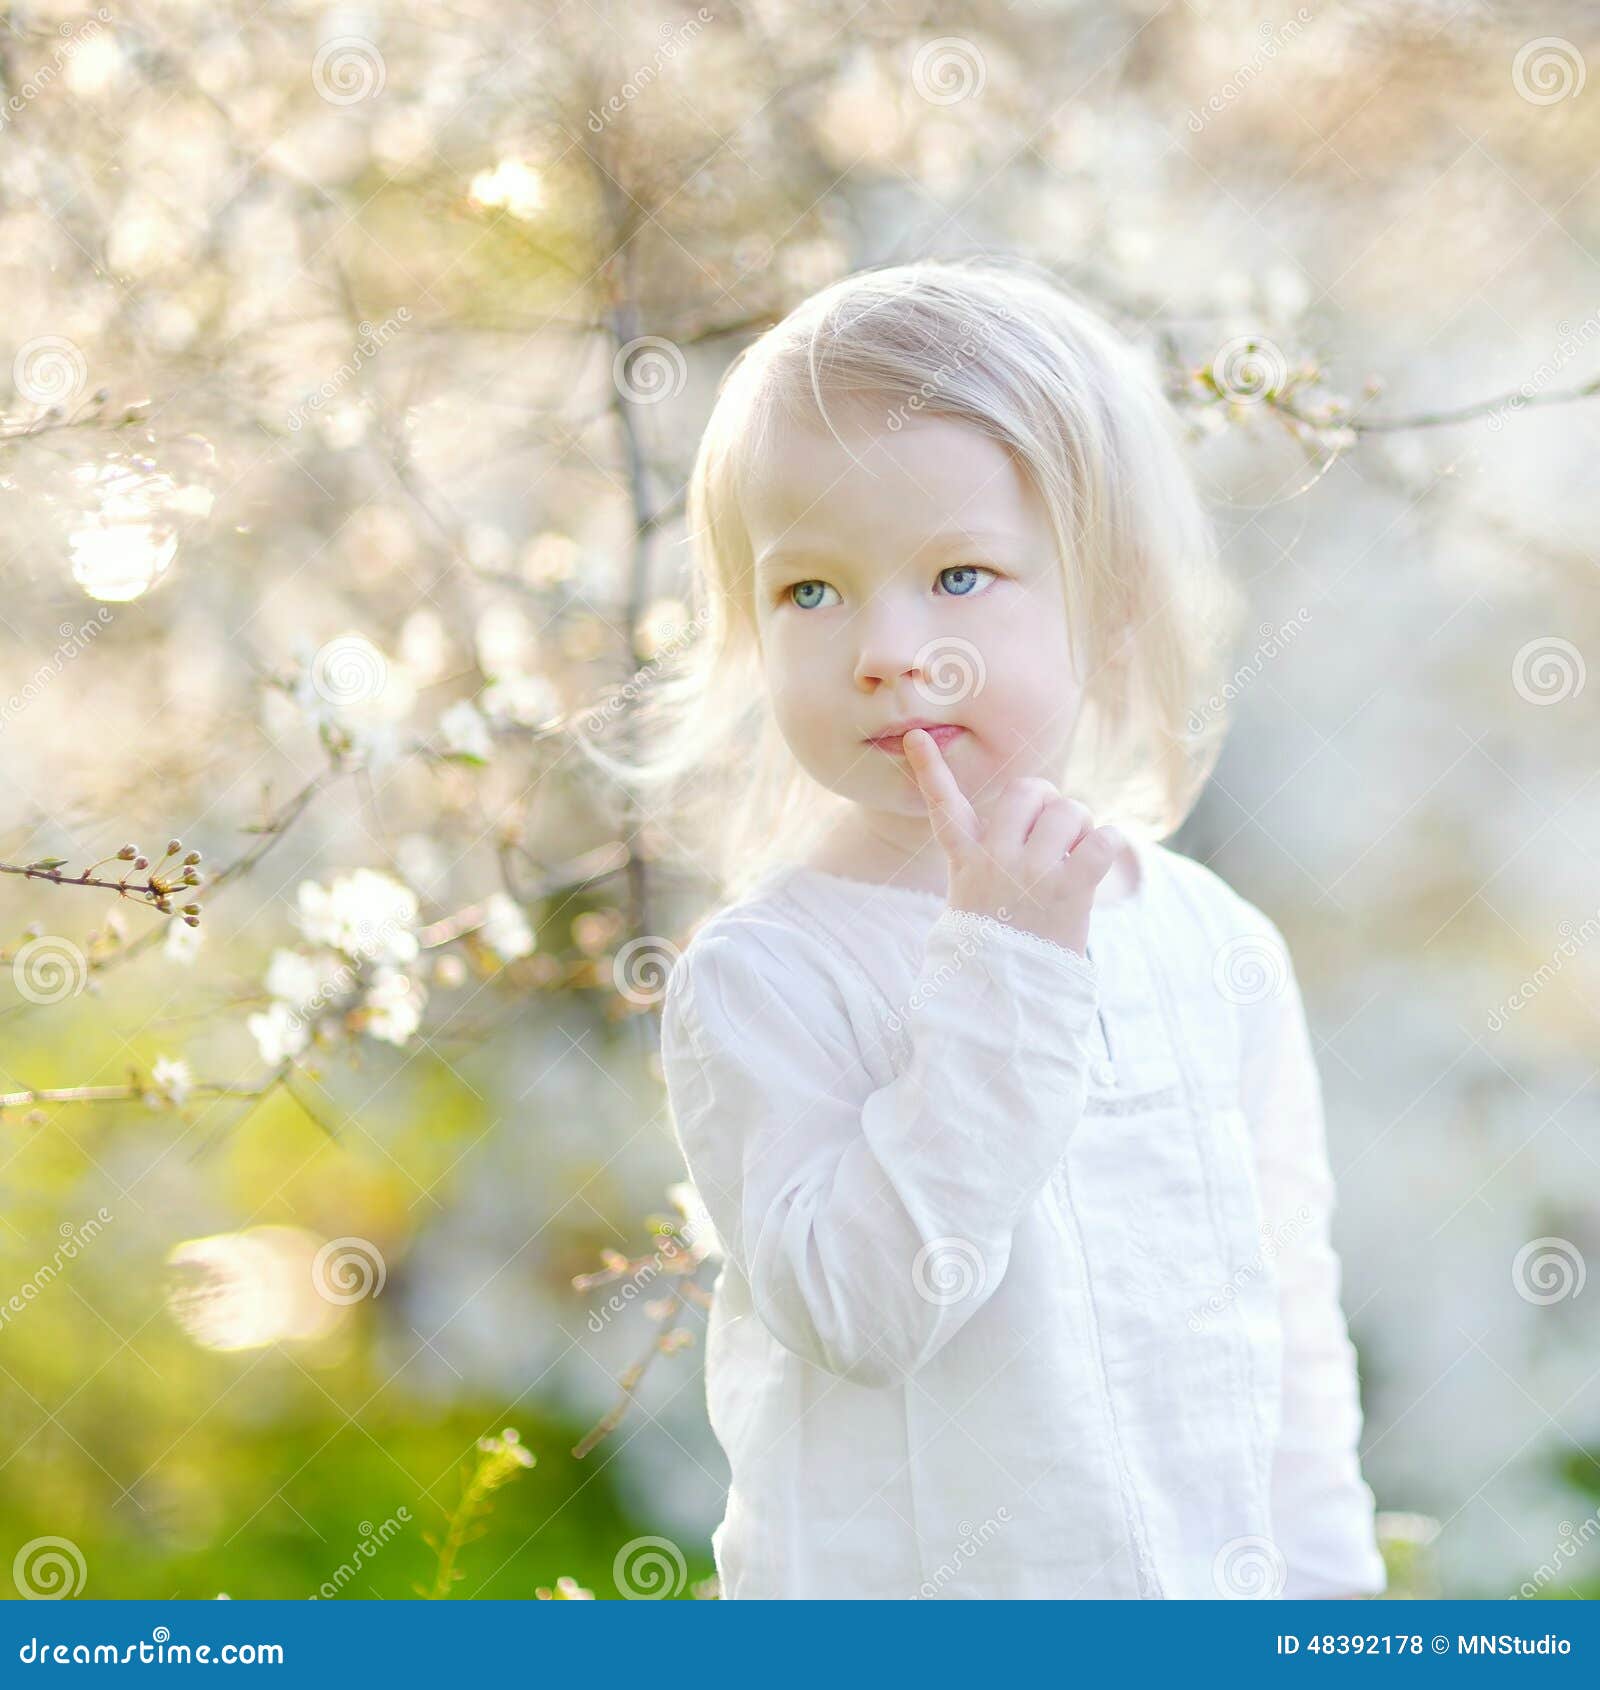 Adorable Little Girl In Blooming Cherry Garden Stock Photo - Image ...